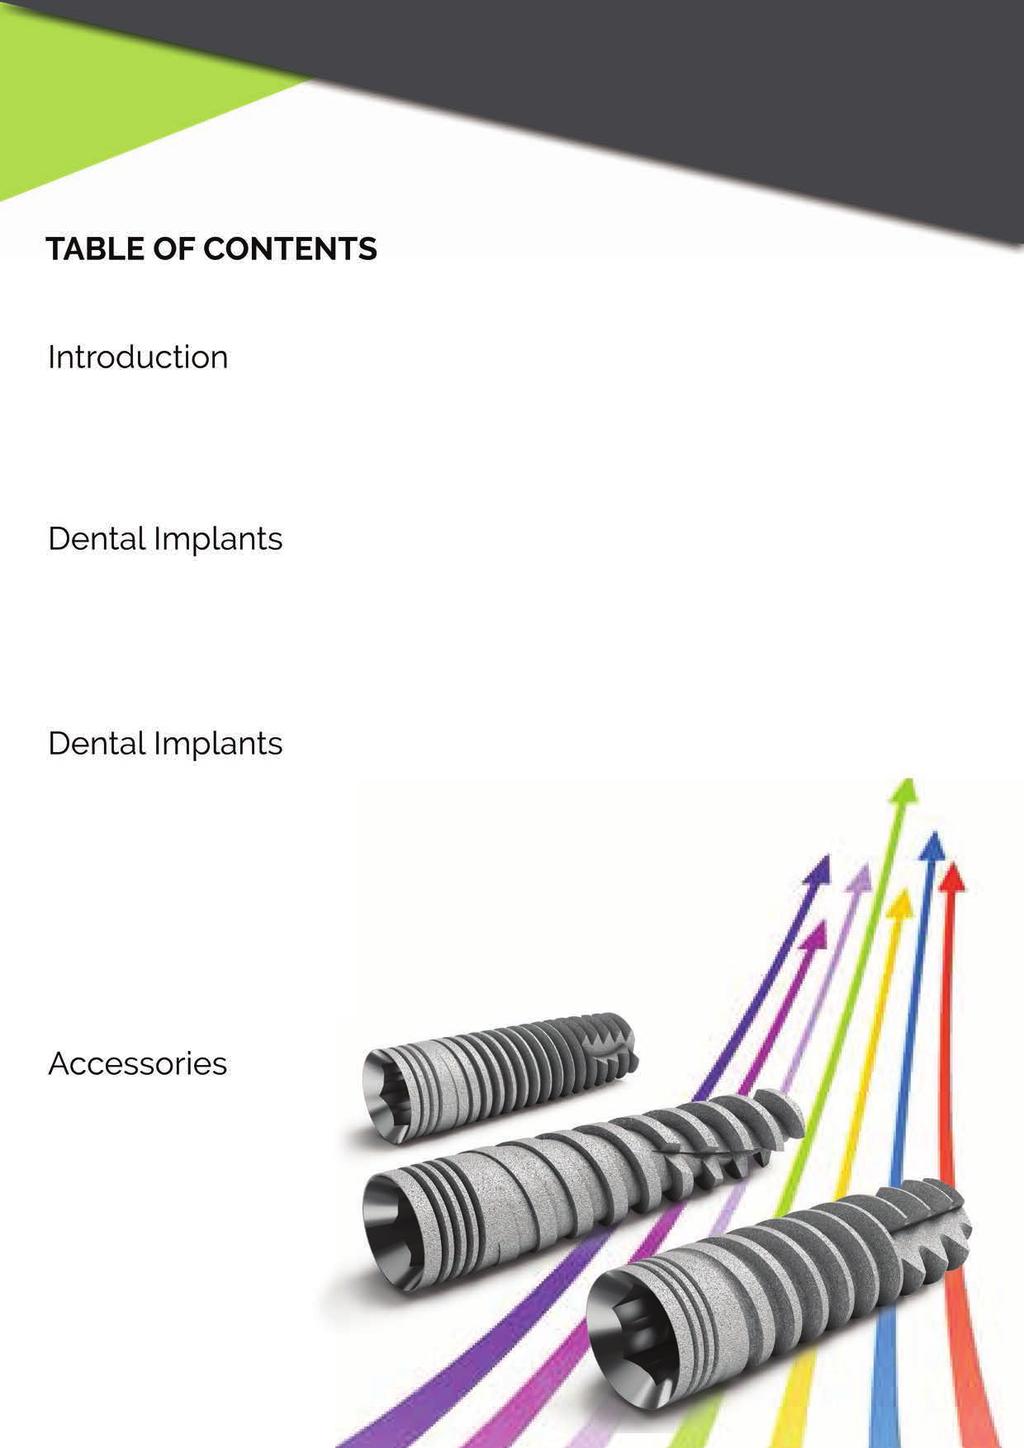 Worldwide activity 3 Who we are 4 Materials 5 Surface Treatment 6 Packaging 7 Letter from CEO 8 Cover 10 SOI Implant 11-12 TOI Implant 13-14 NSI Implant 15-16 SHI Implant 17-18 CNI Implant 19-20